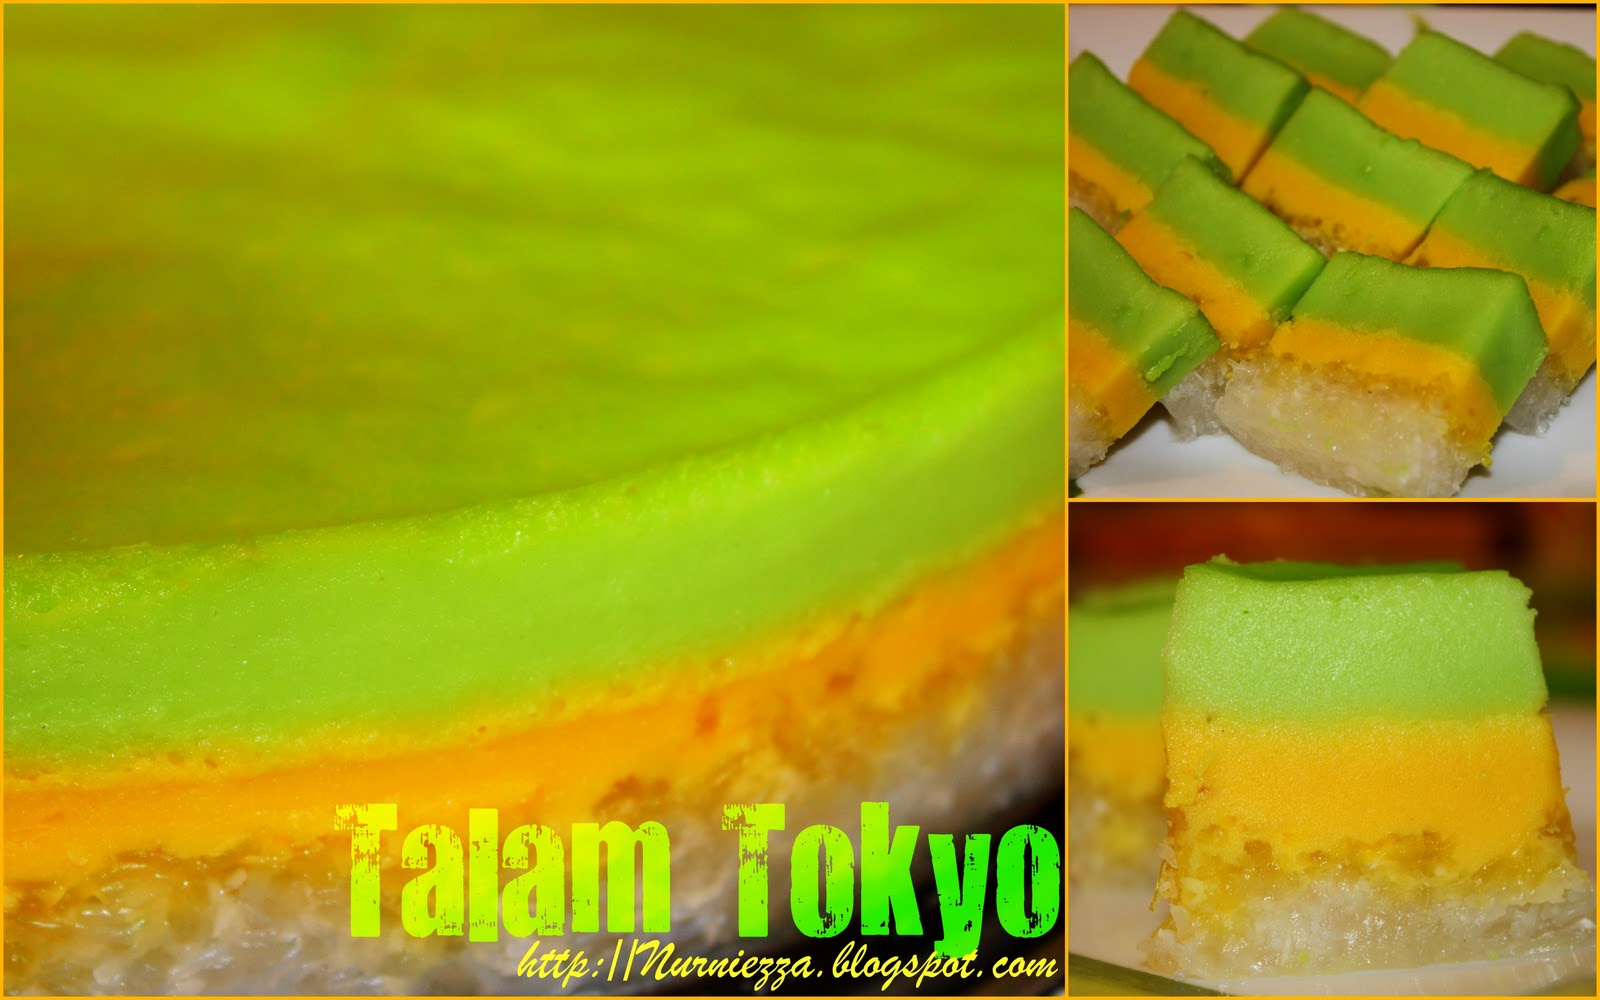 Our Journey Begins: Talam Tokyo